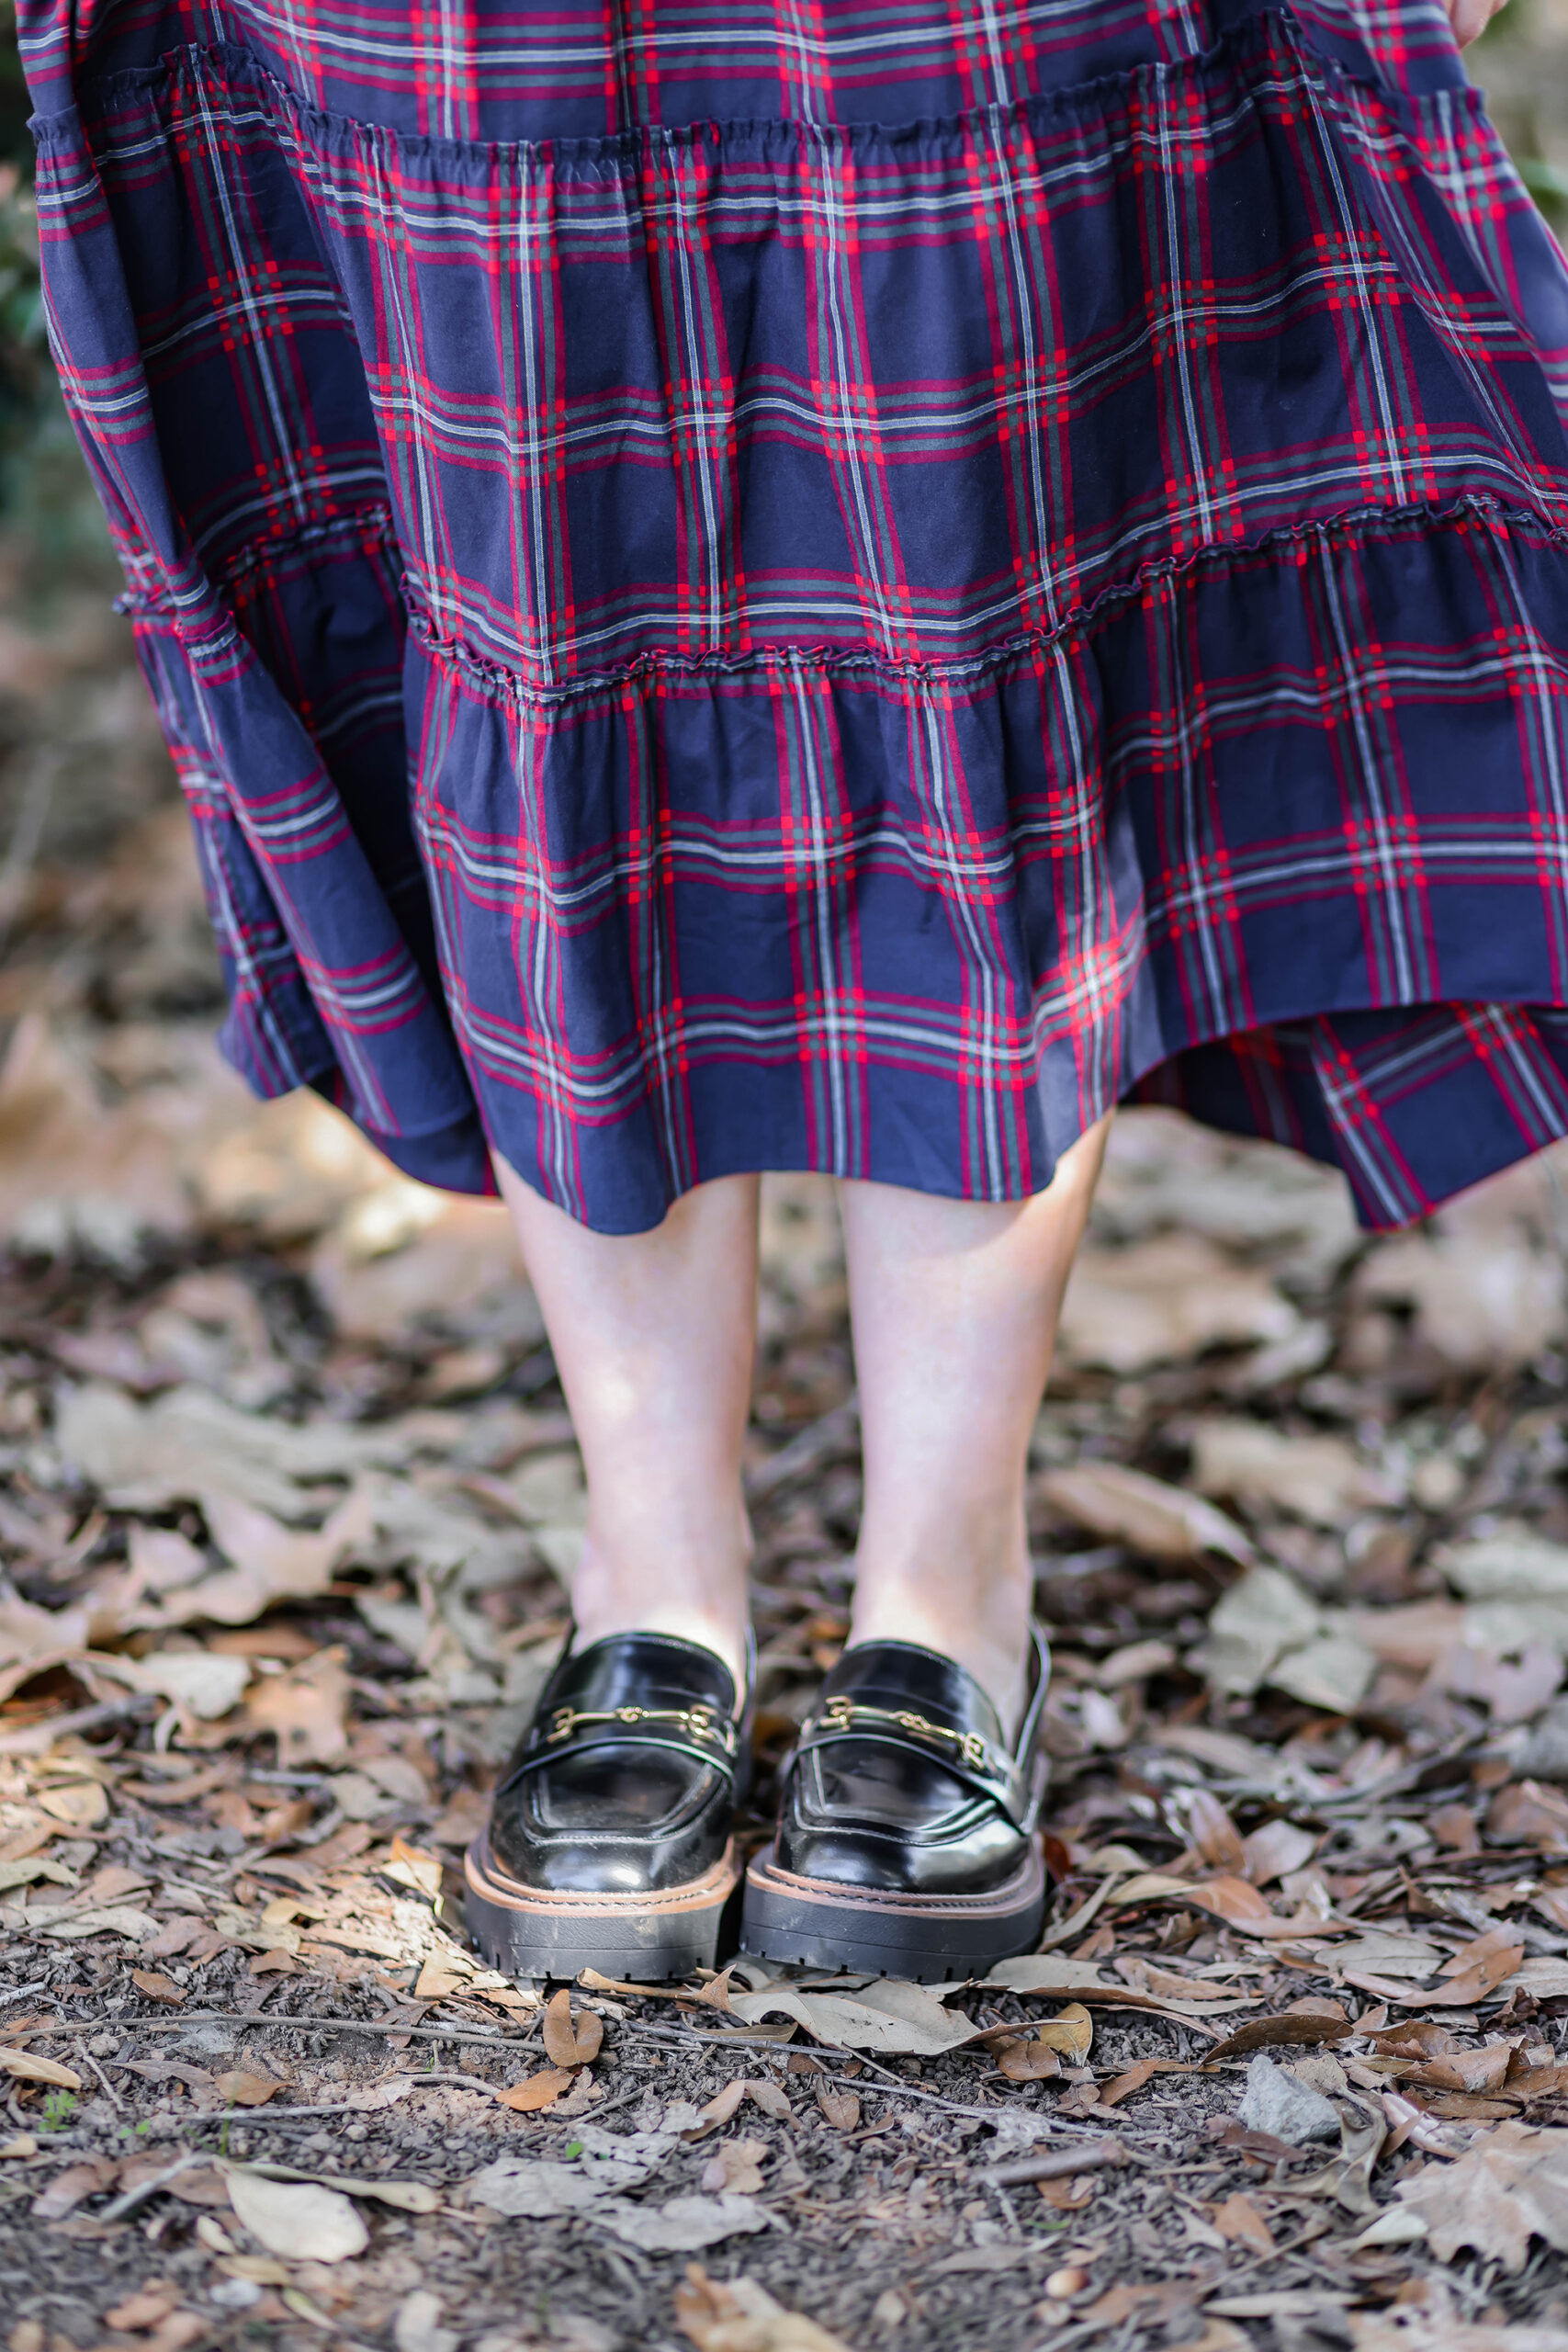 Looking for the best ways to style your new pair of loafers? From casual outfit options to workwear....these are loafers outfits ideas using items you probably already have in your closet!